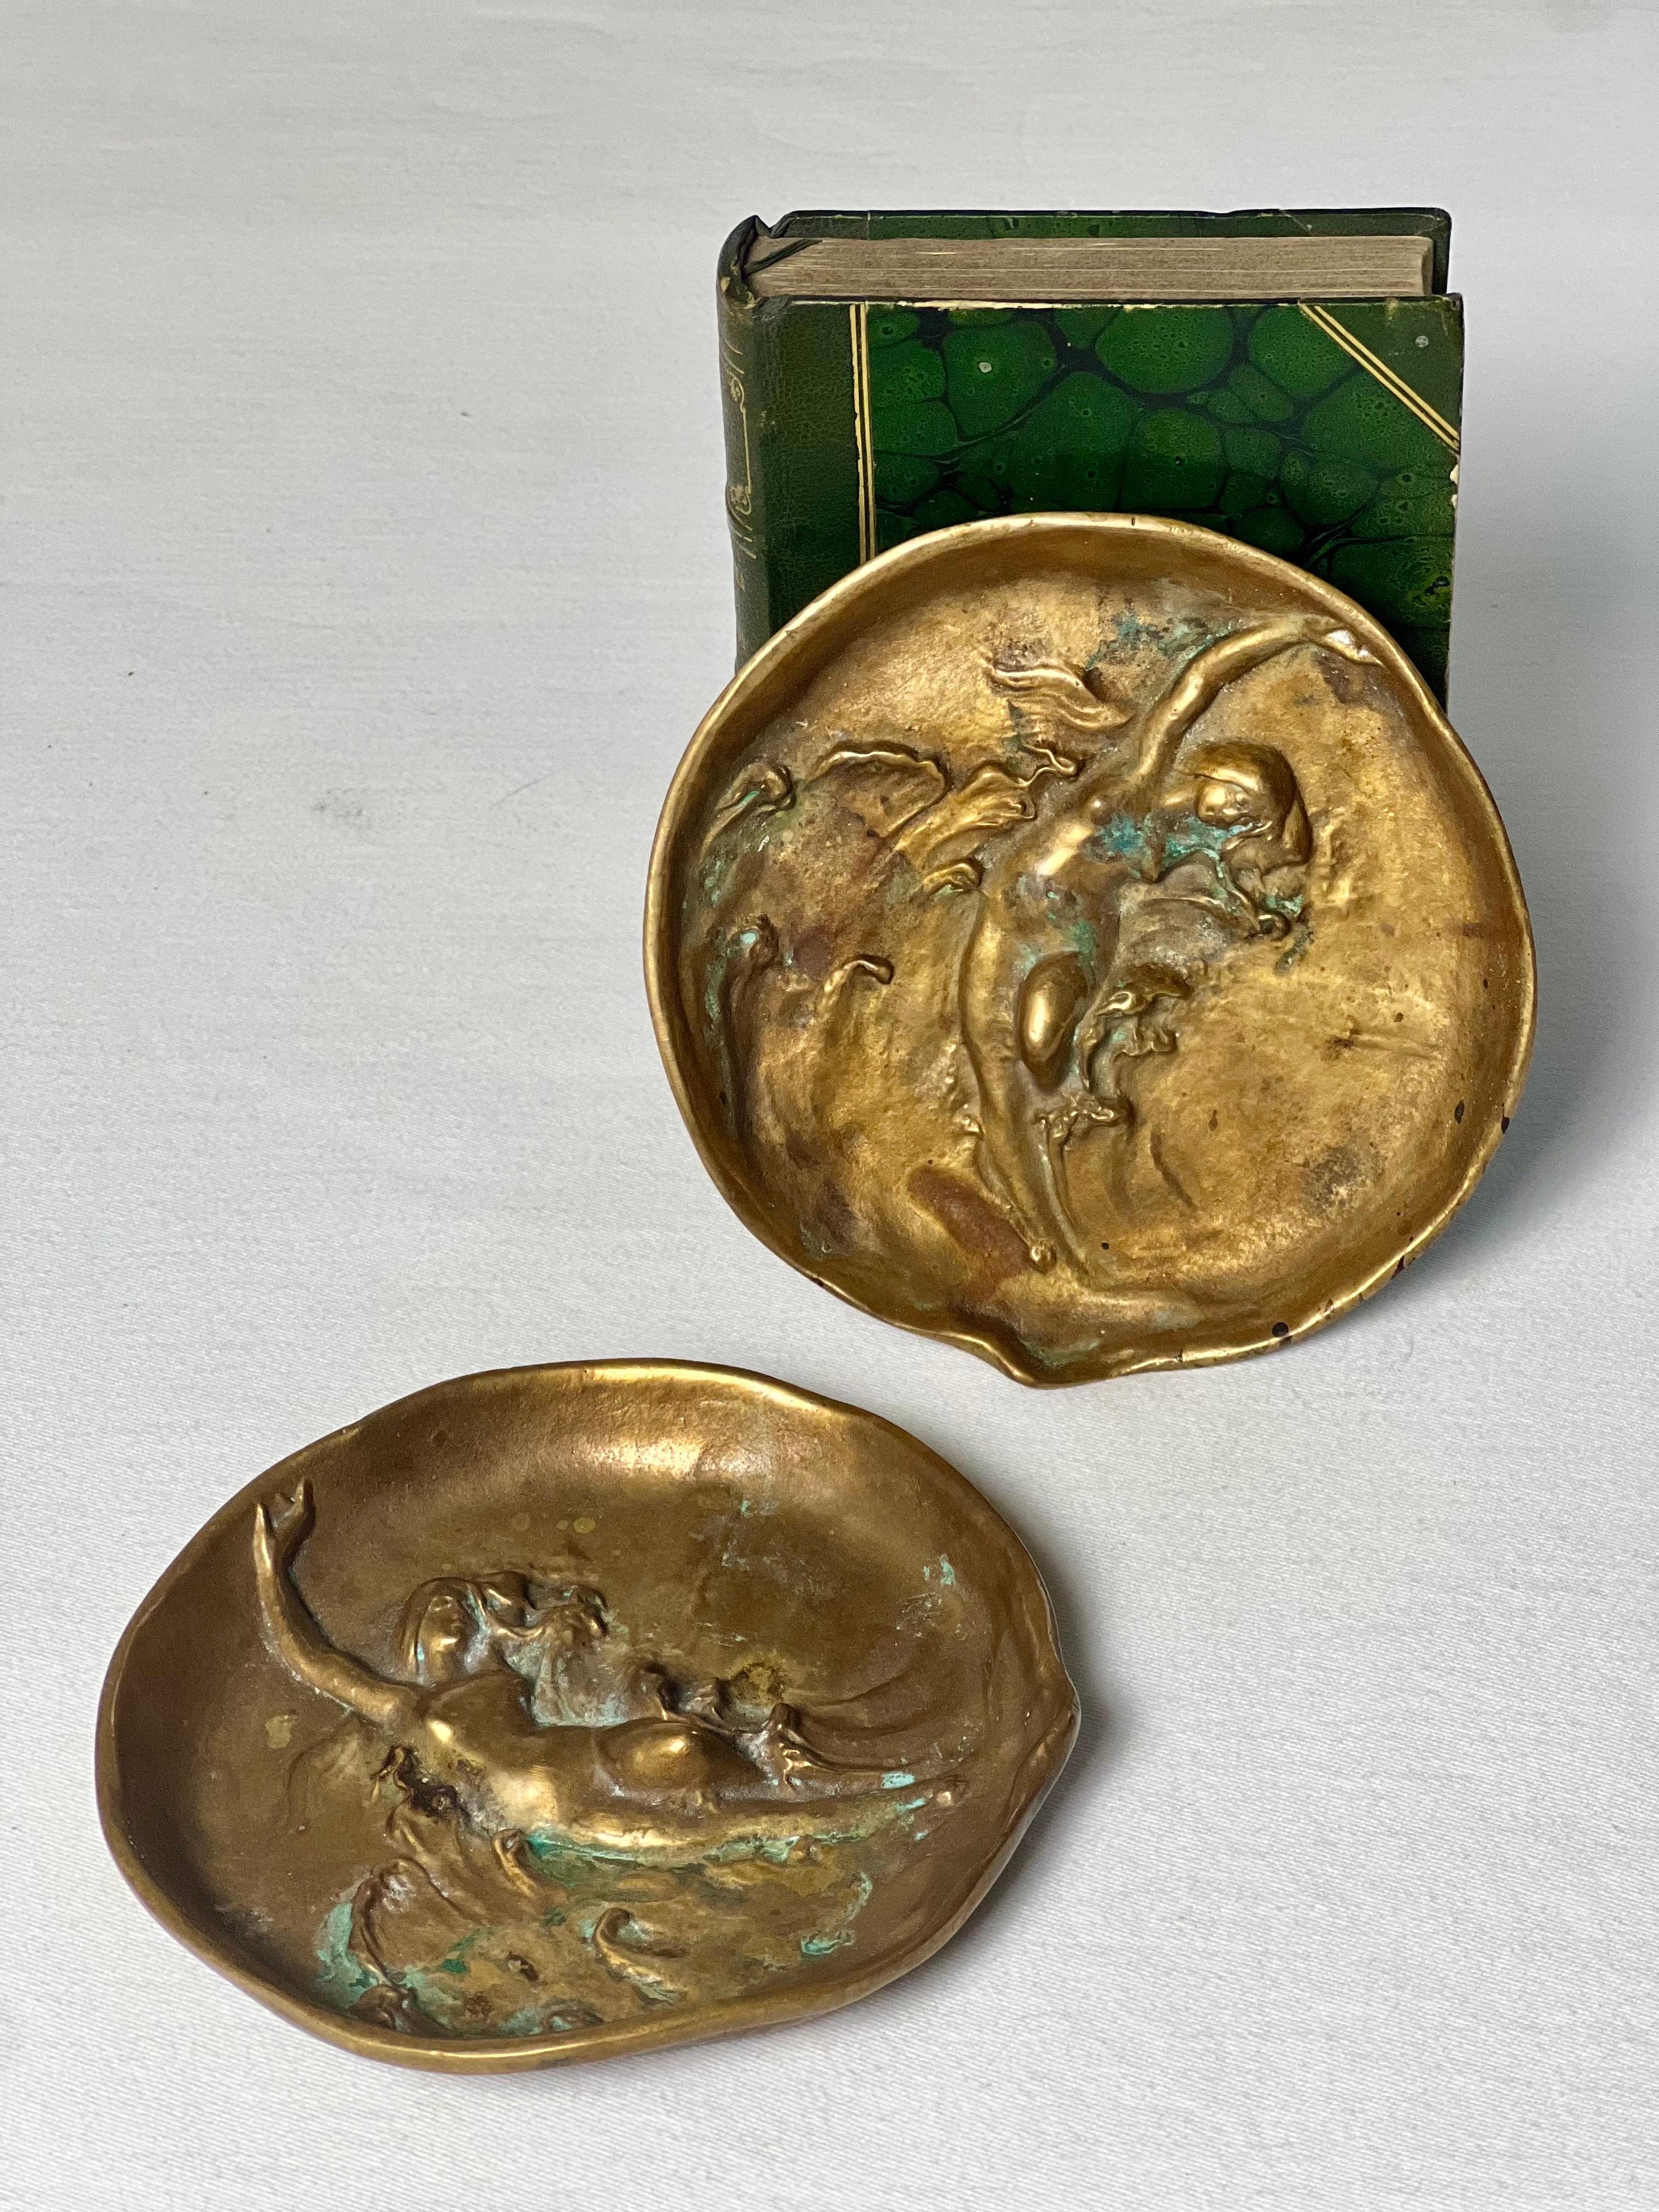 Dunhill Art Nouveau Patinated Bronze Dish Vide Poche Ashtrays In Good Condition For Sale In Doylestown, PA